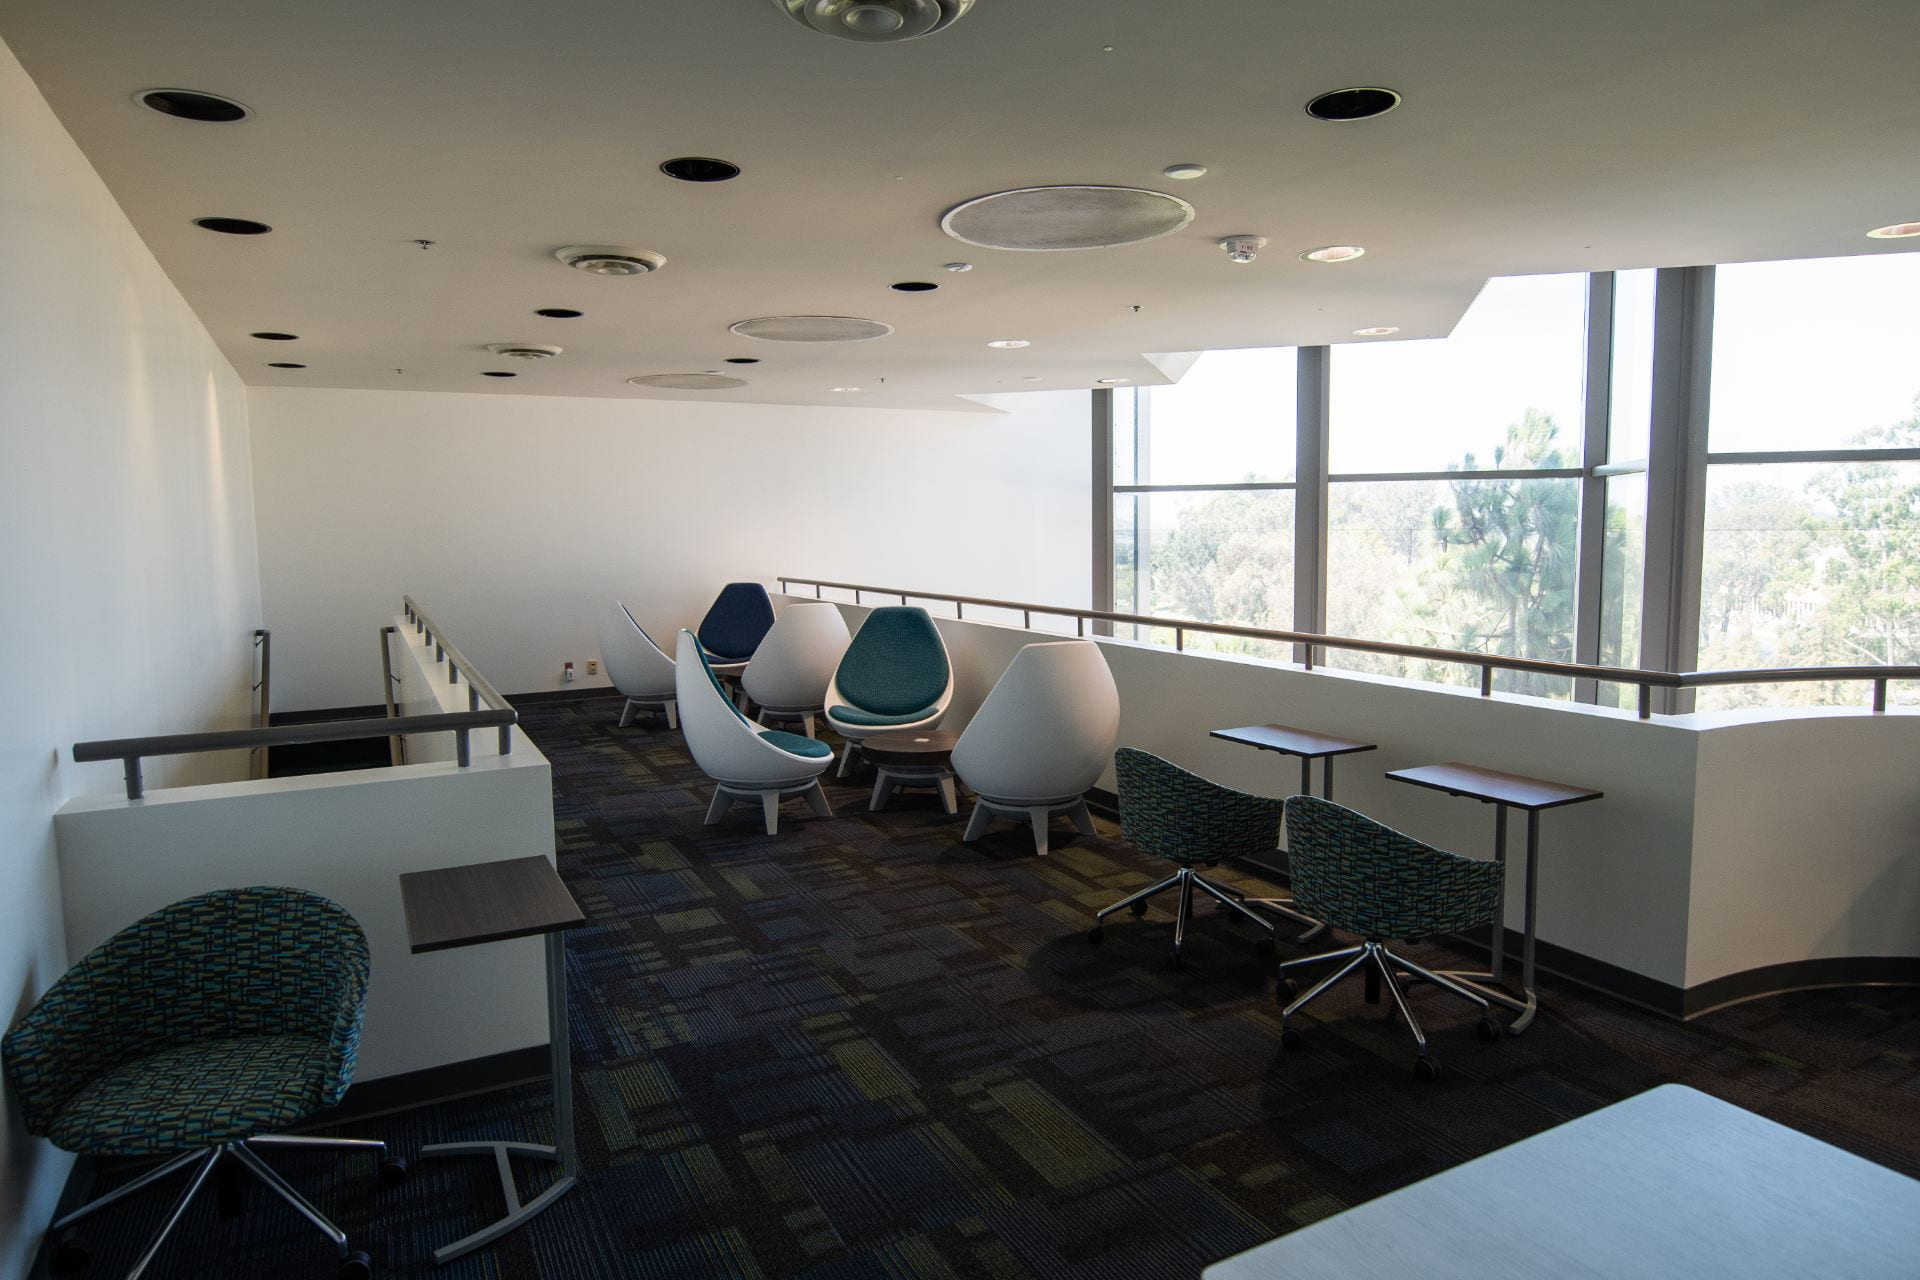 Top floor of Student Excellence Center, room arranged with chairs and tables for leisure